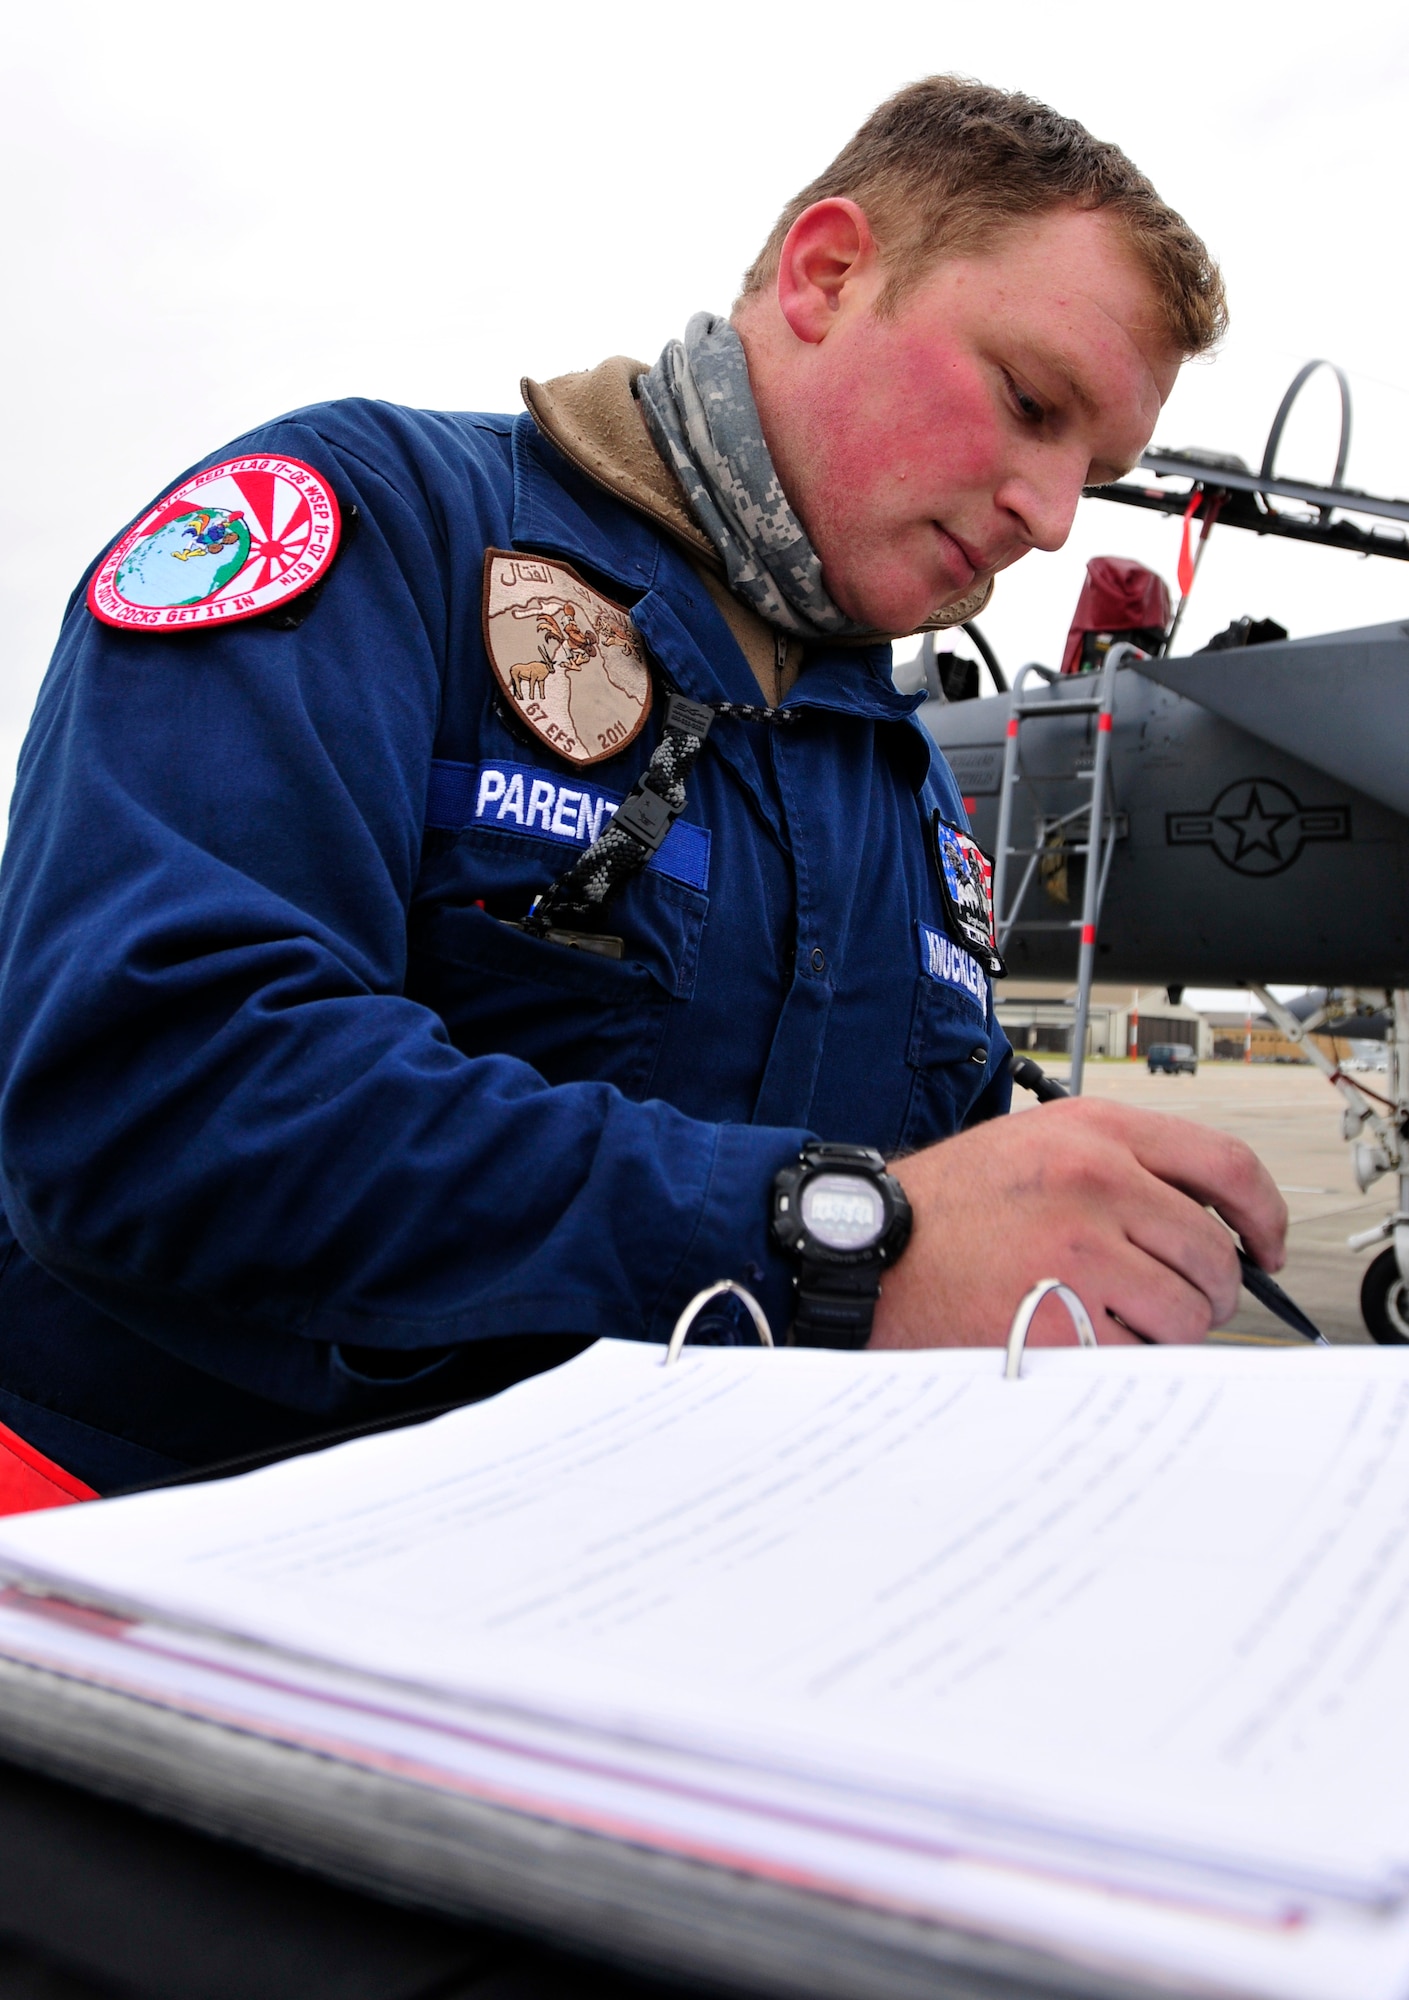 ROYAL AIR FORCE LAKENHEATH, England – Senior Airman Jordan Parente, 48th Aircraft Maintenance Squadron crew chief, fills out aircraft forms for new panels on the flightline, Dec. 1, 2011. Parente contributed to the accomplishments which helped lead to Capt. William Bernecker, former 48th AMXS Officer in Charge, being awarded the Gen. Lew Allen Jr. Trophy. (U.S. Air Force photo by Senior Airman Tiffany M. Deuel)